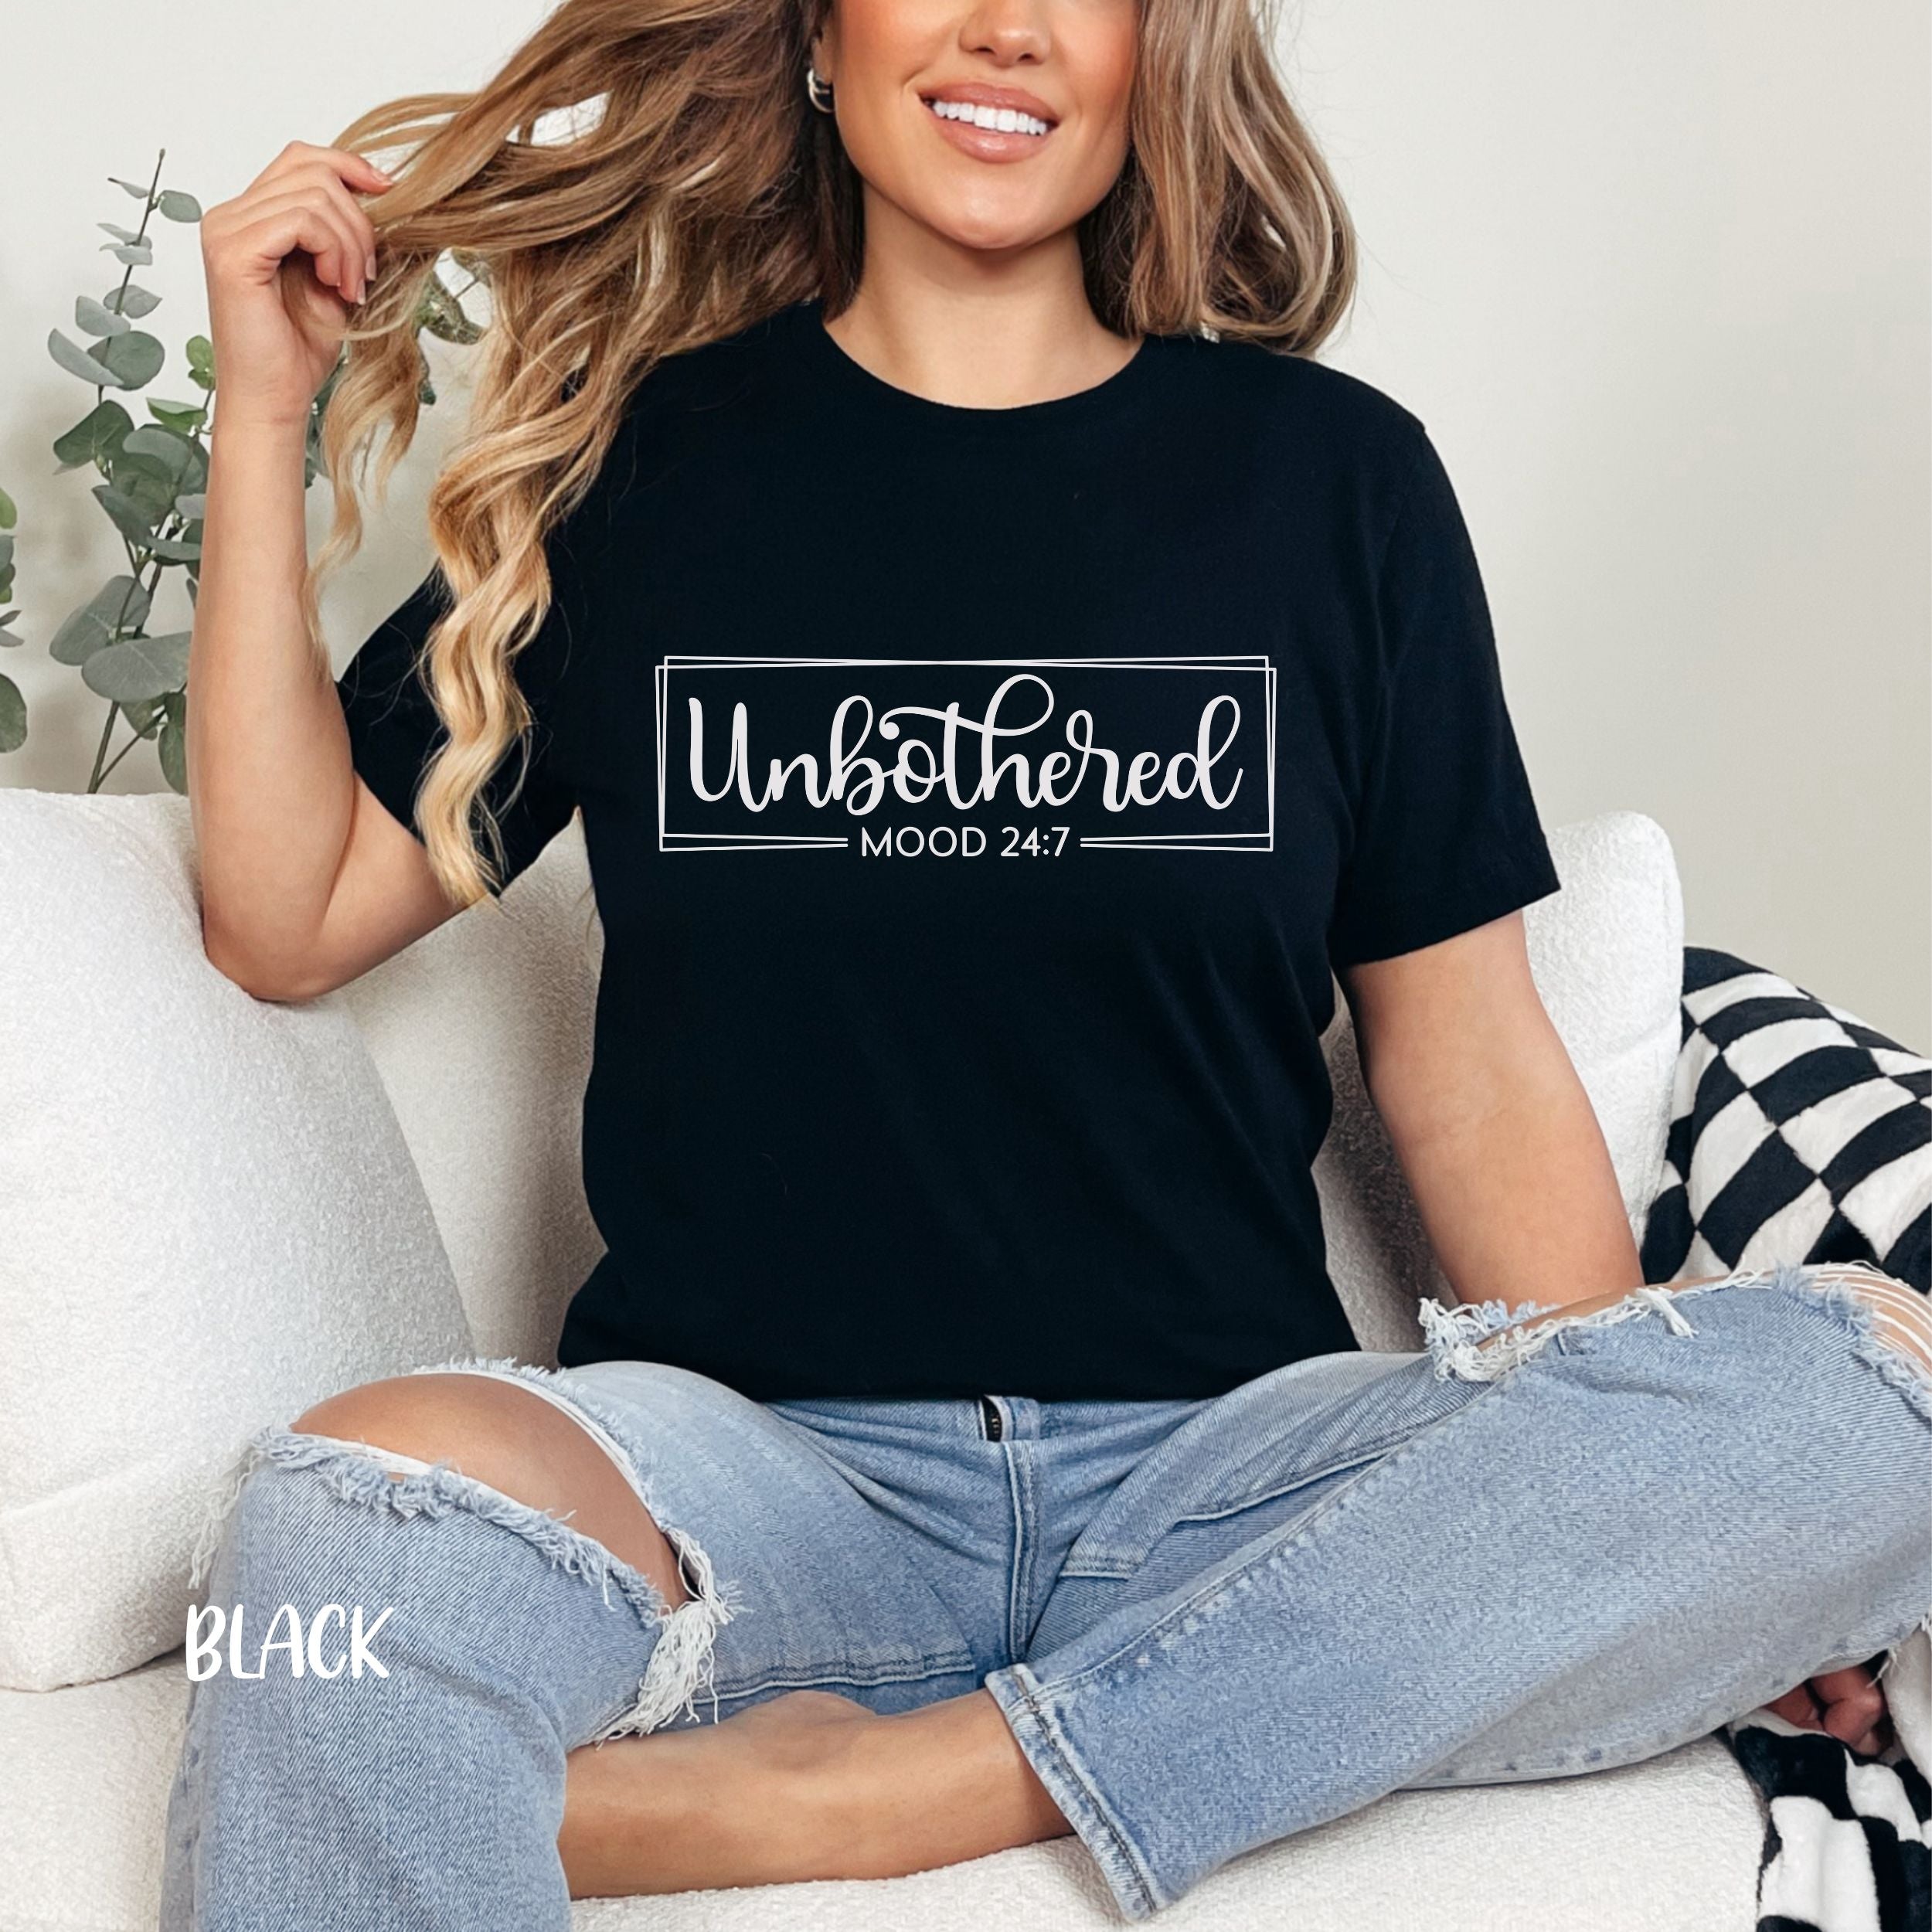 Unbothered Mood 24/7 Shirt - Gift for Her